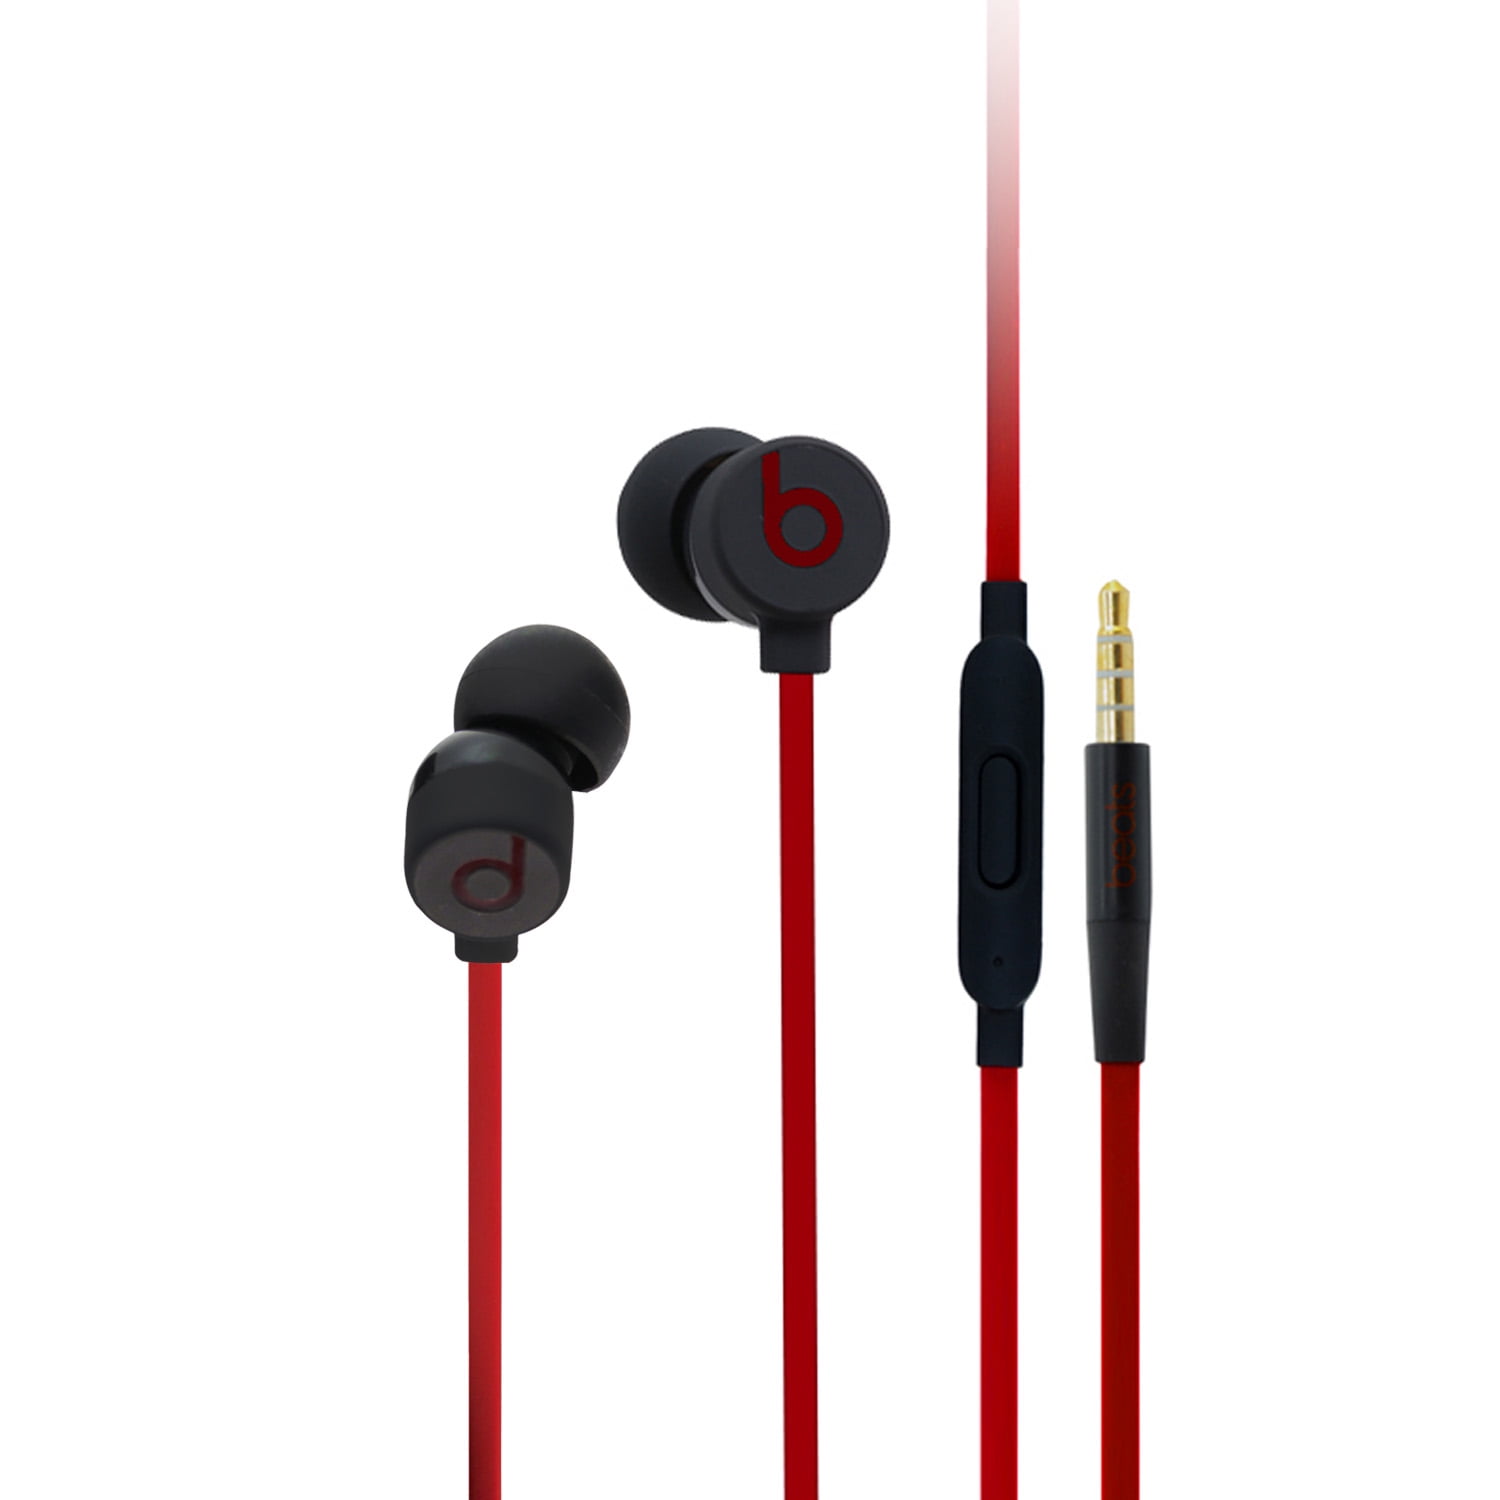 Restored Beats by Dr. Dre Beats urBeats 3 Earphones with Linein Mic Wired Jack Noise Isolating, Black/Red (Refurbished) Walmart.com